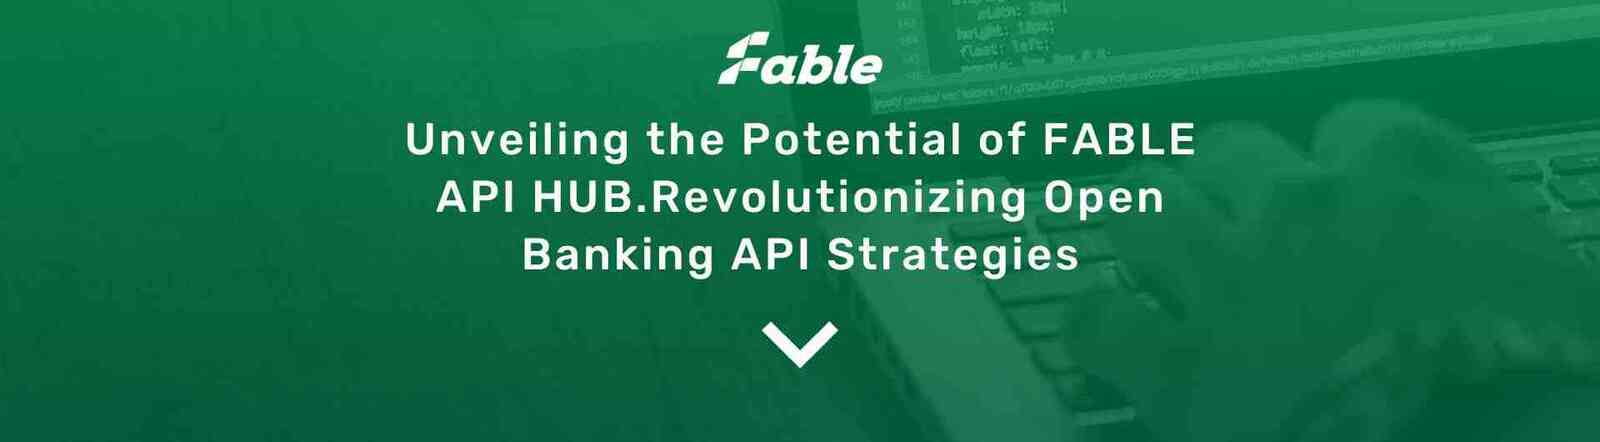 Unveiling the Potential of FABLE API HUB.Revolutionizing Open Banking API Strategies